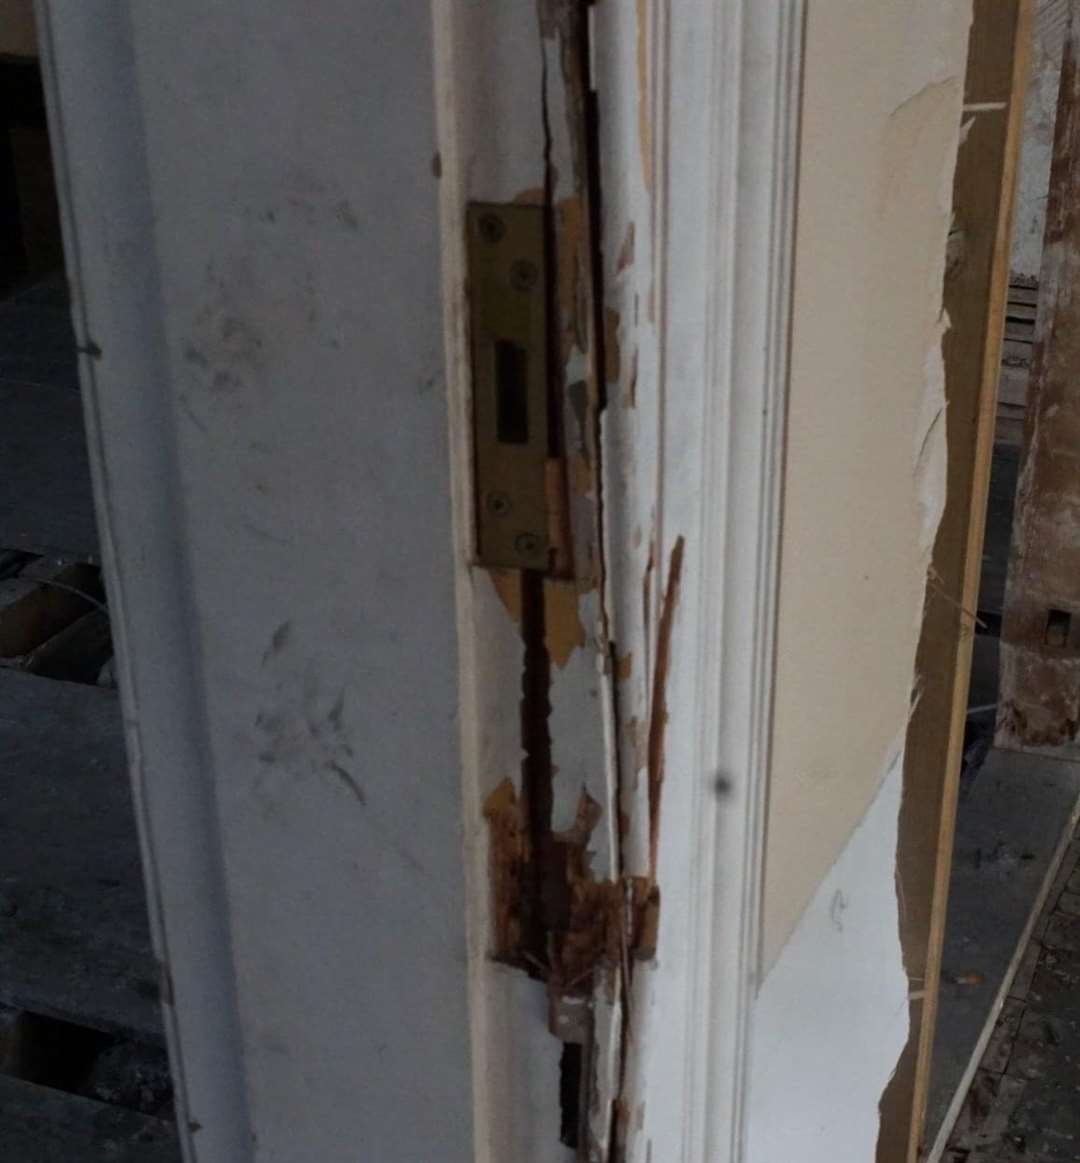 Doors were severely damaged during a police raid in May 2012. Picture: Stone Court House Facebook